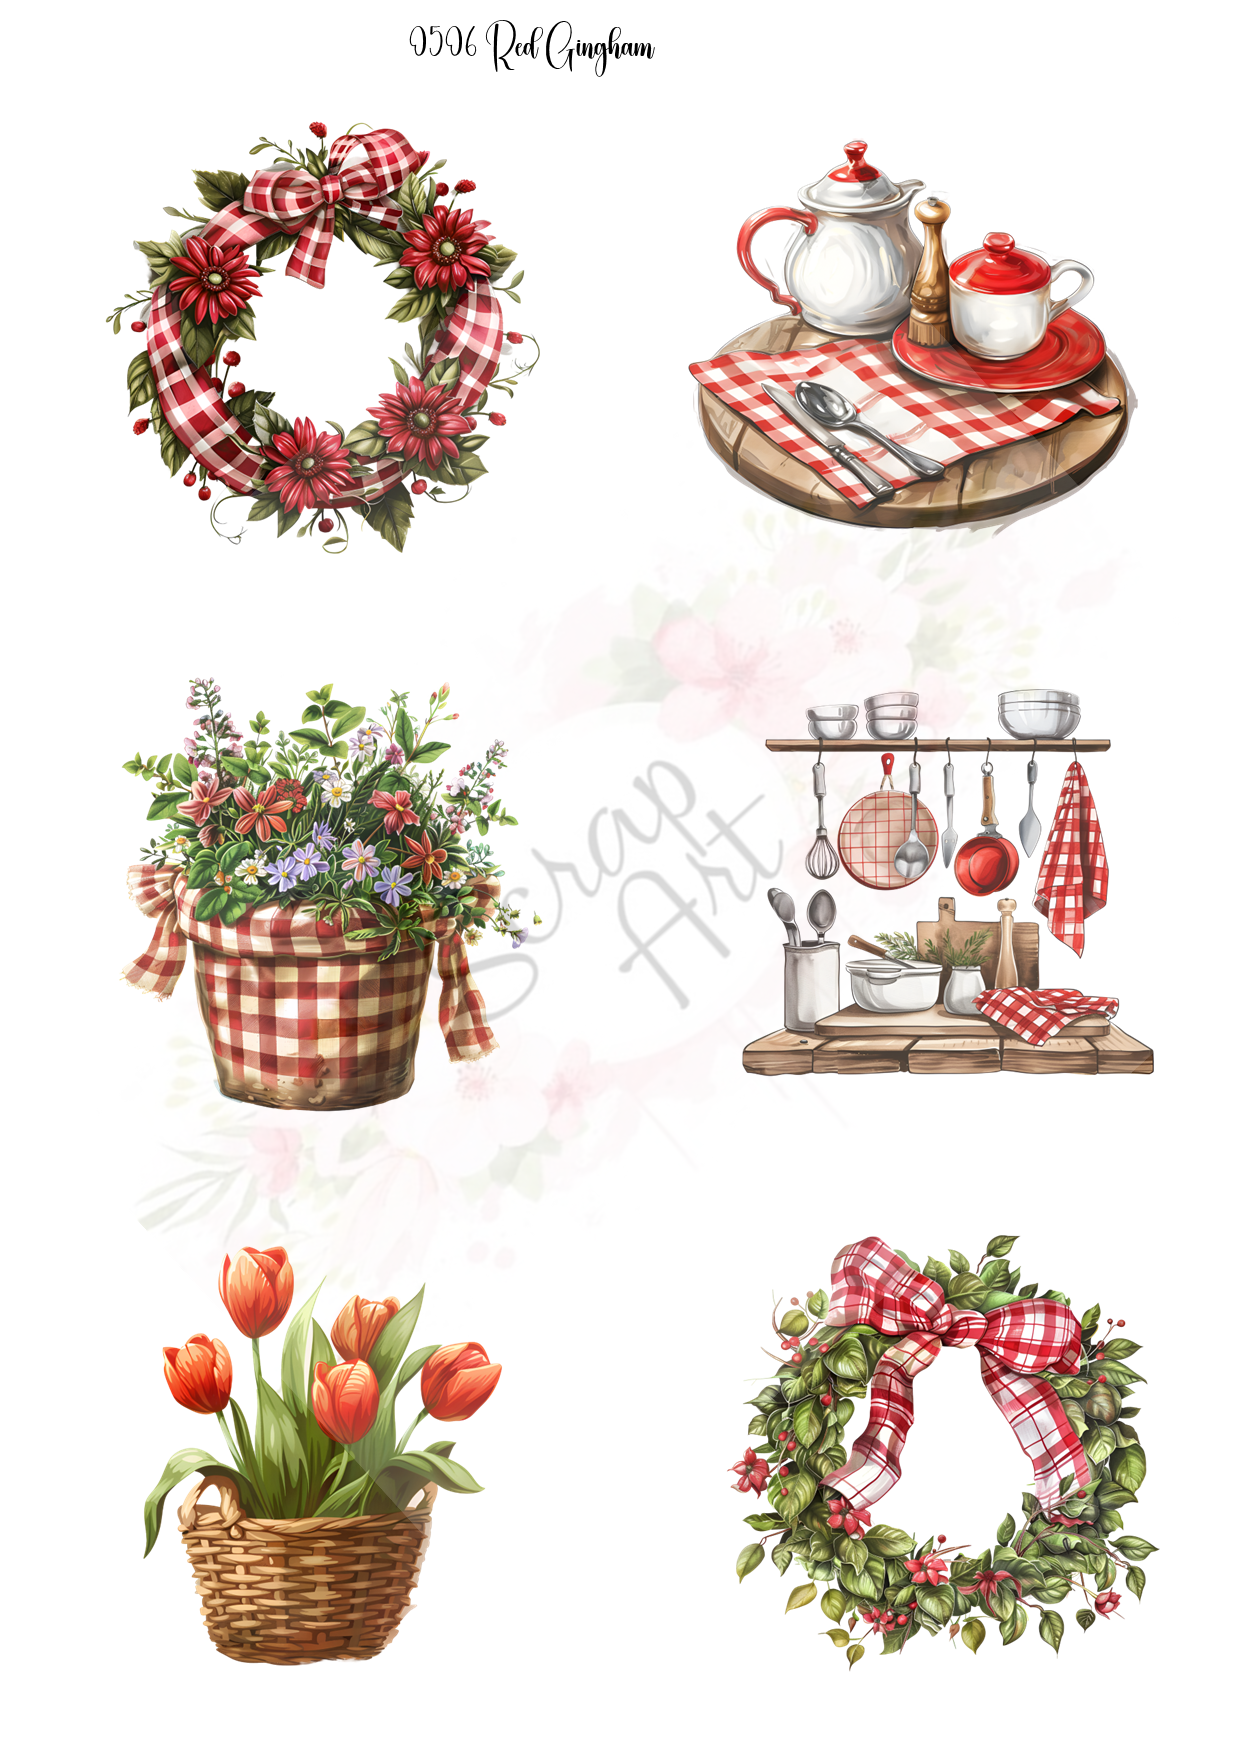 0506 Red  Gingham